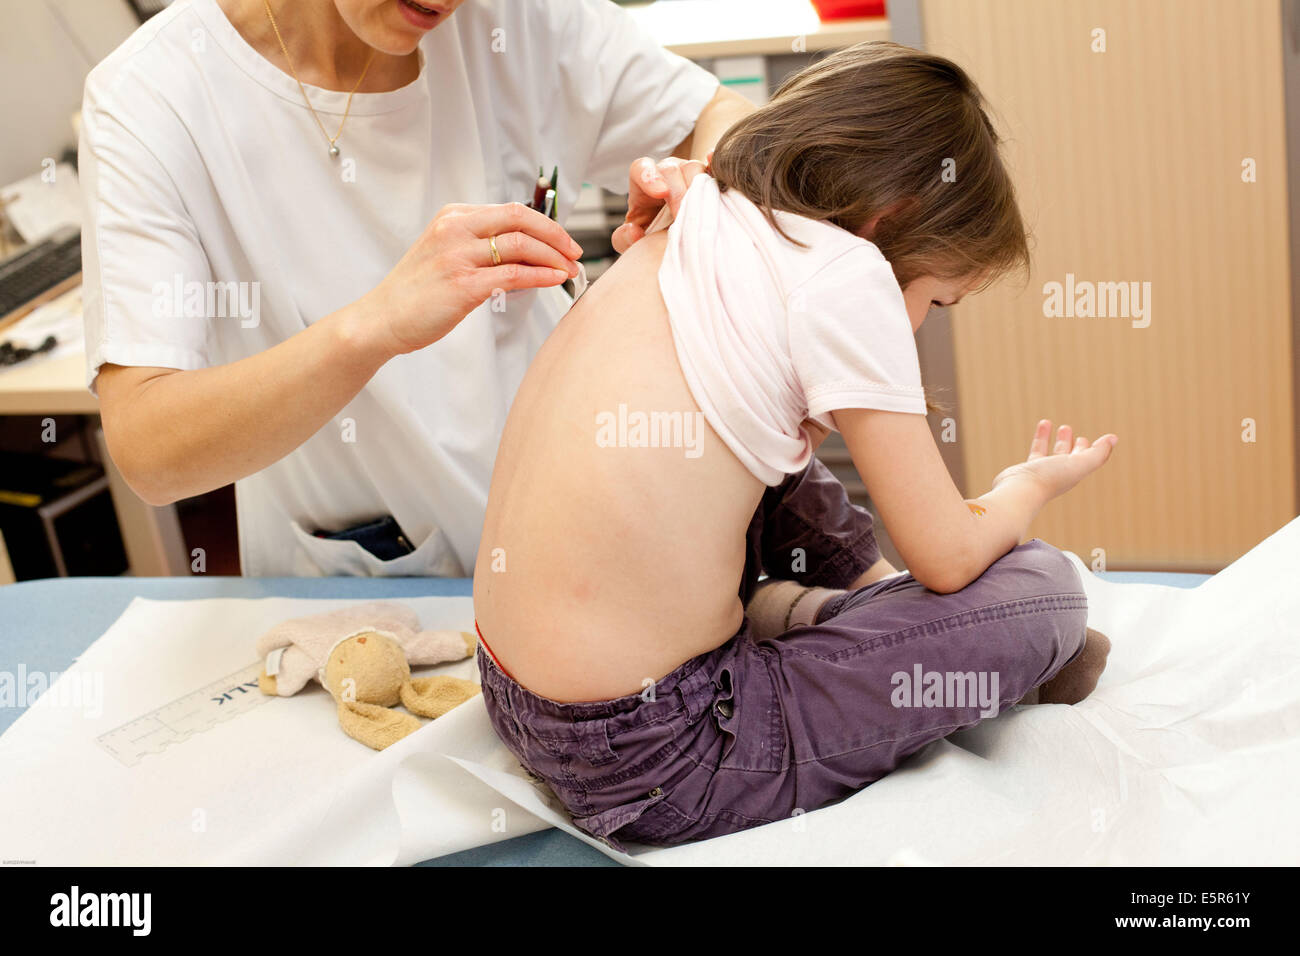 Patch test to detect food allergies, Limoges hospital, France. Stock Photo